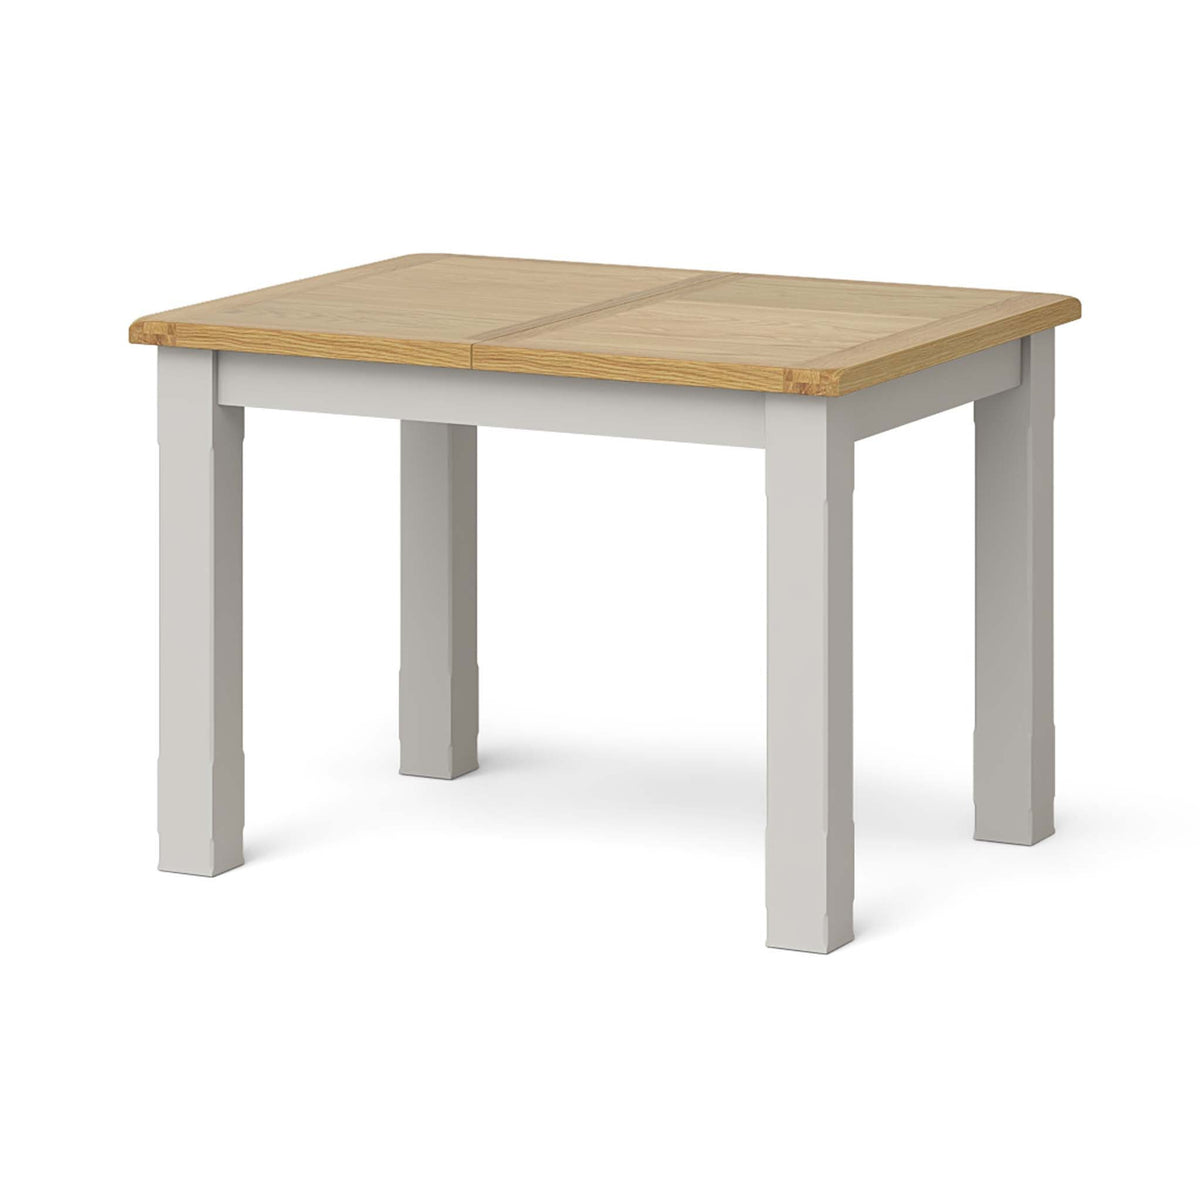 Lundy Grey Compact Extending Dining Table - Closed view